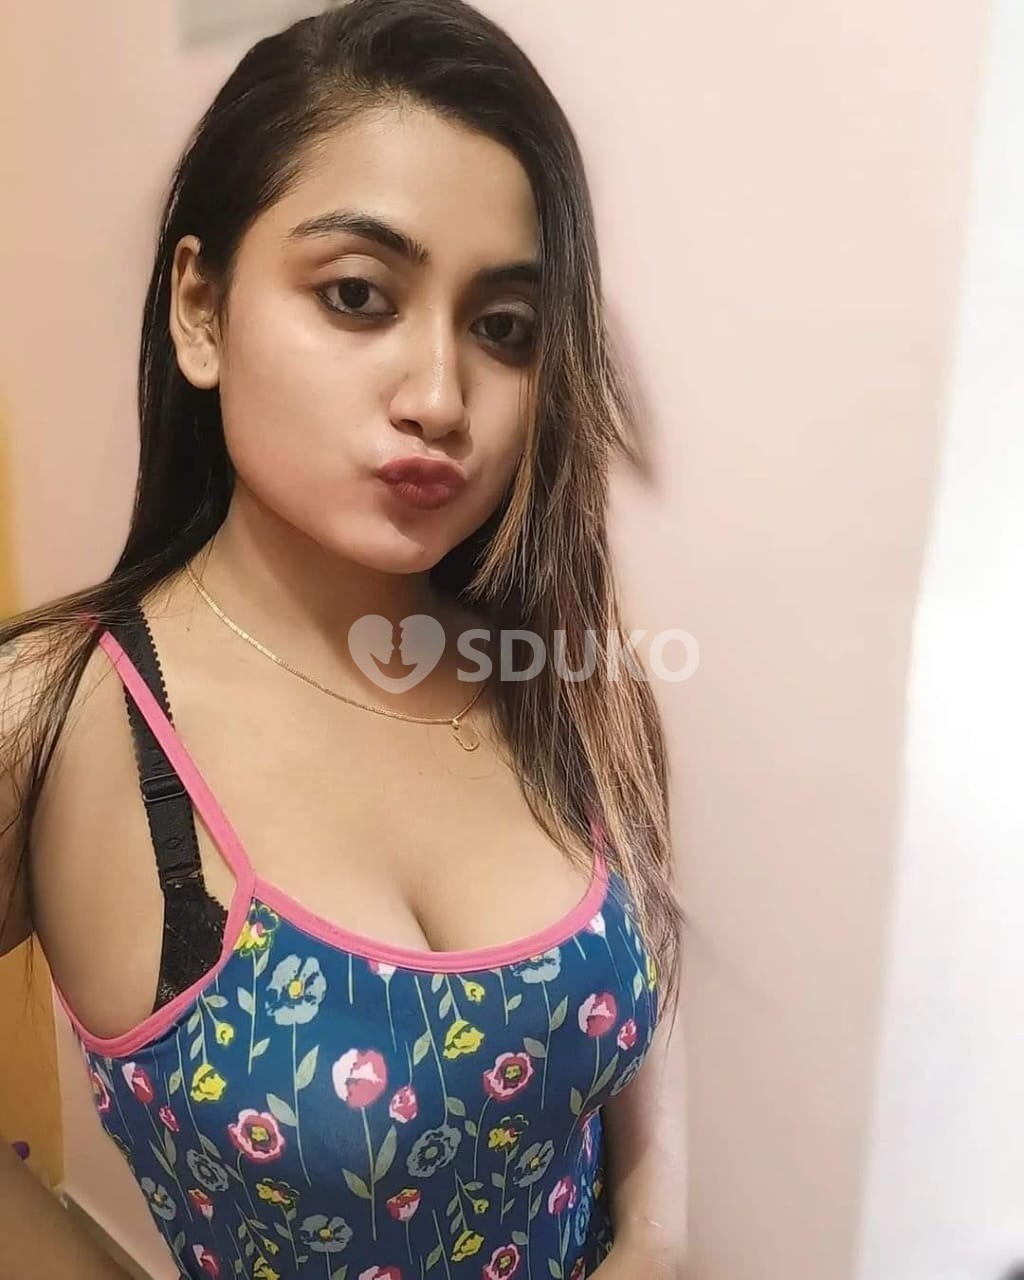 Bhubaneswar ❣️❣️Low price high profile college girl and aunty available any time available service genuine vip c